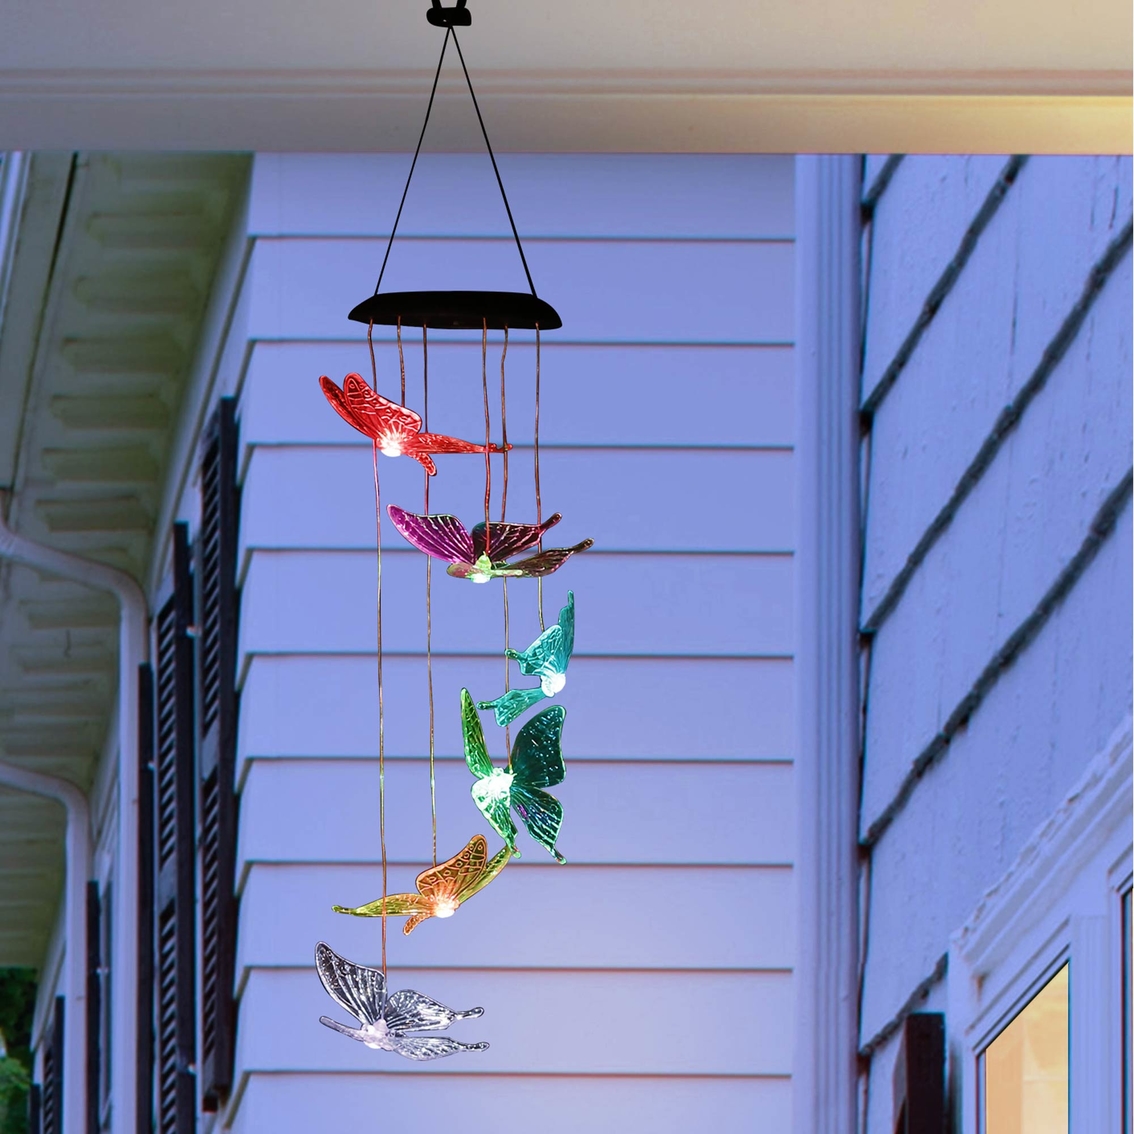 Alpine Solar Butterfly Wind Chime with LED Light - Image 3 of 4